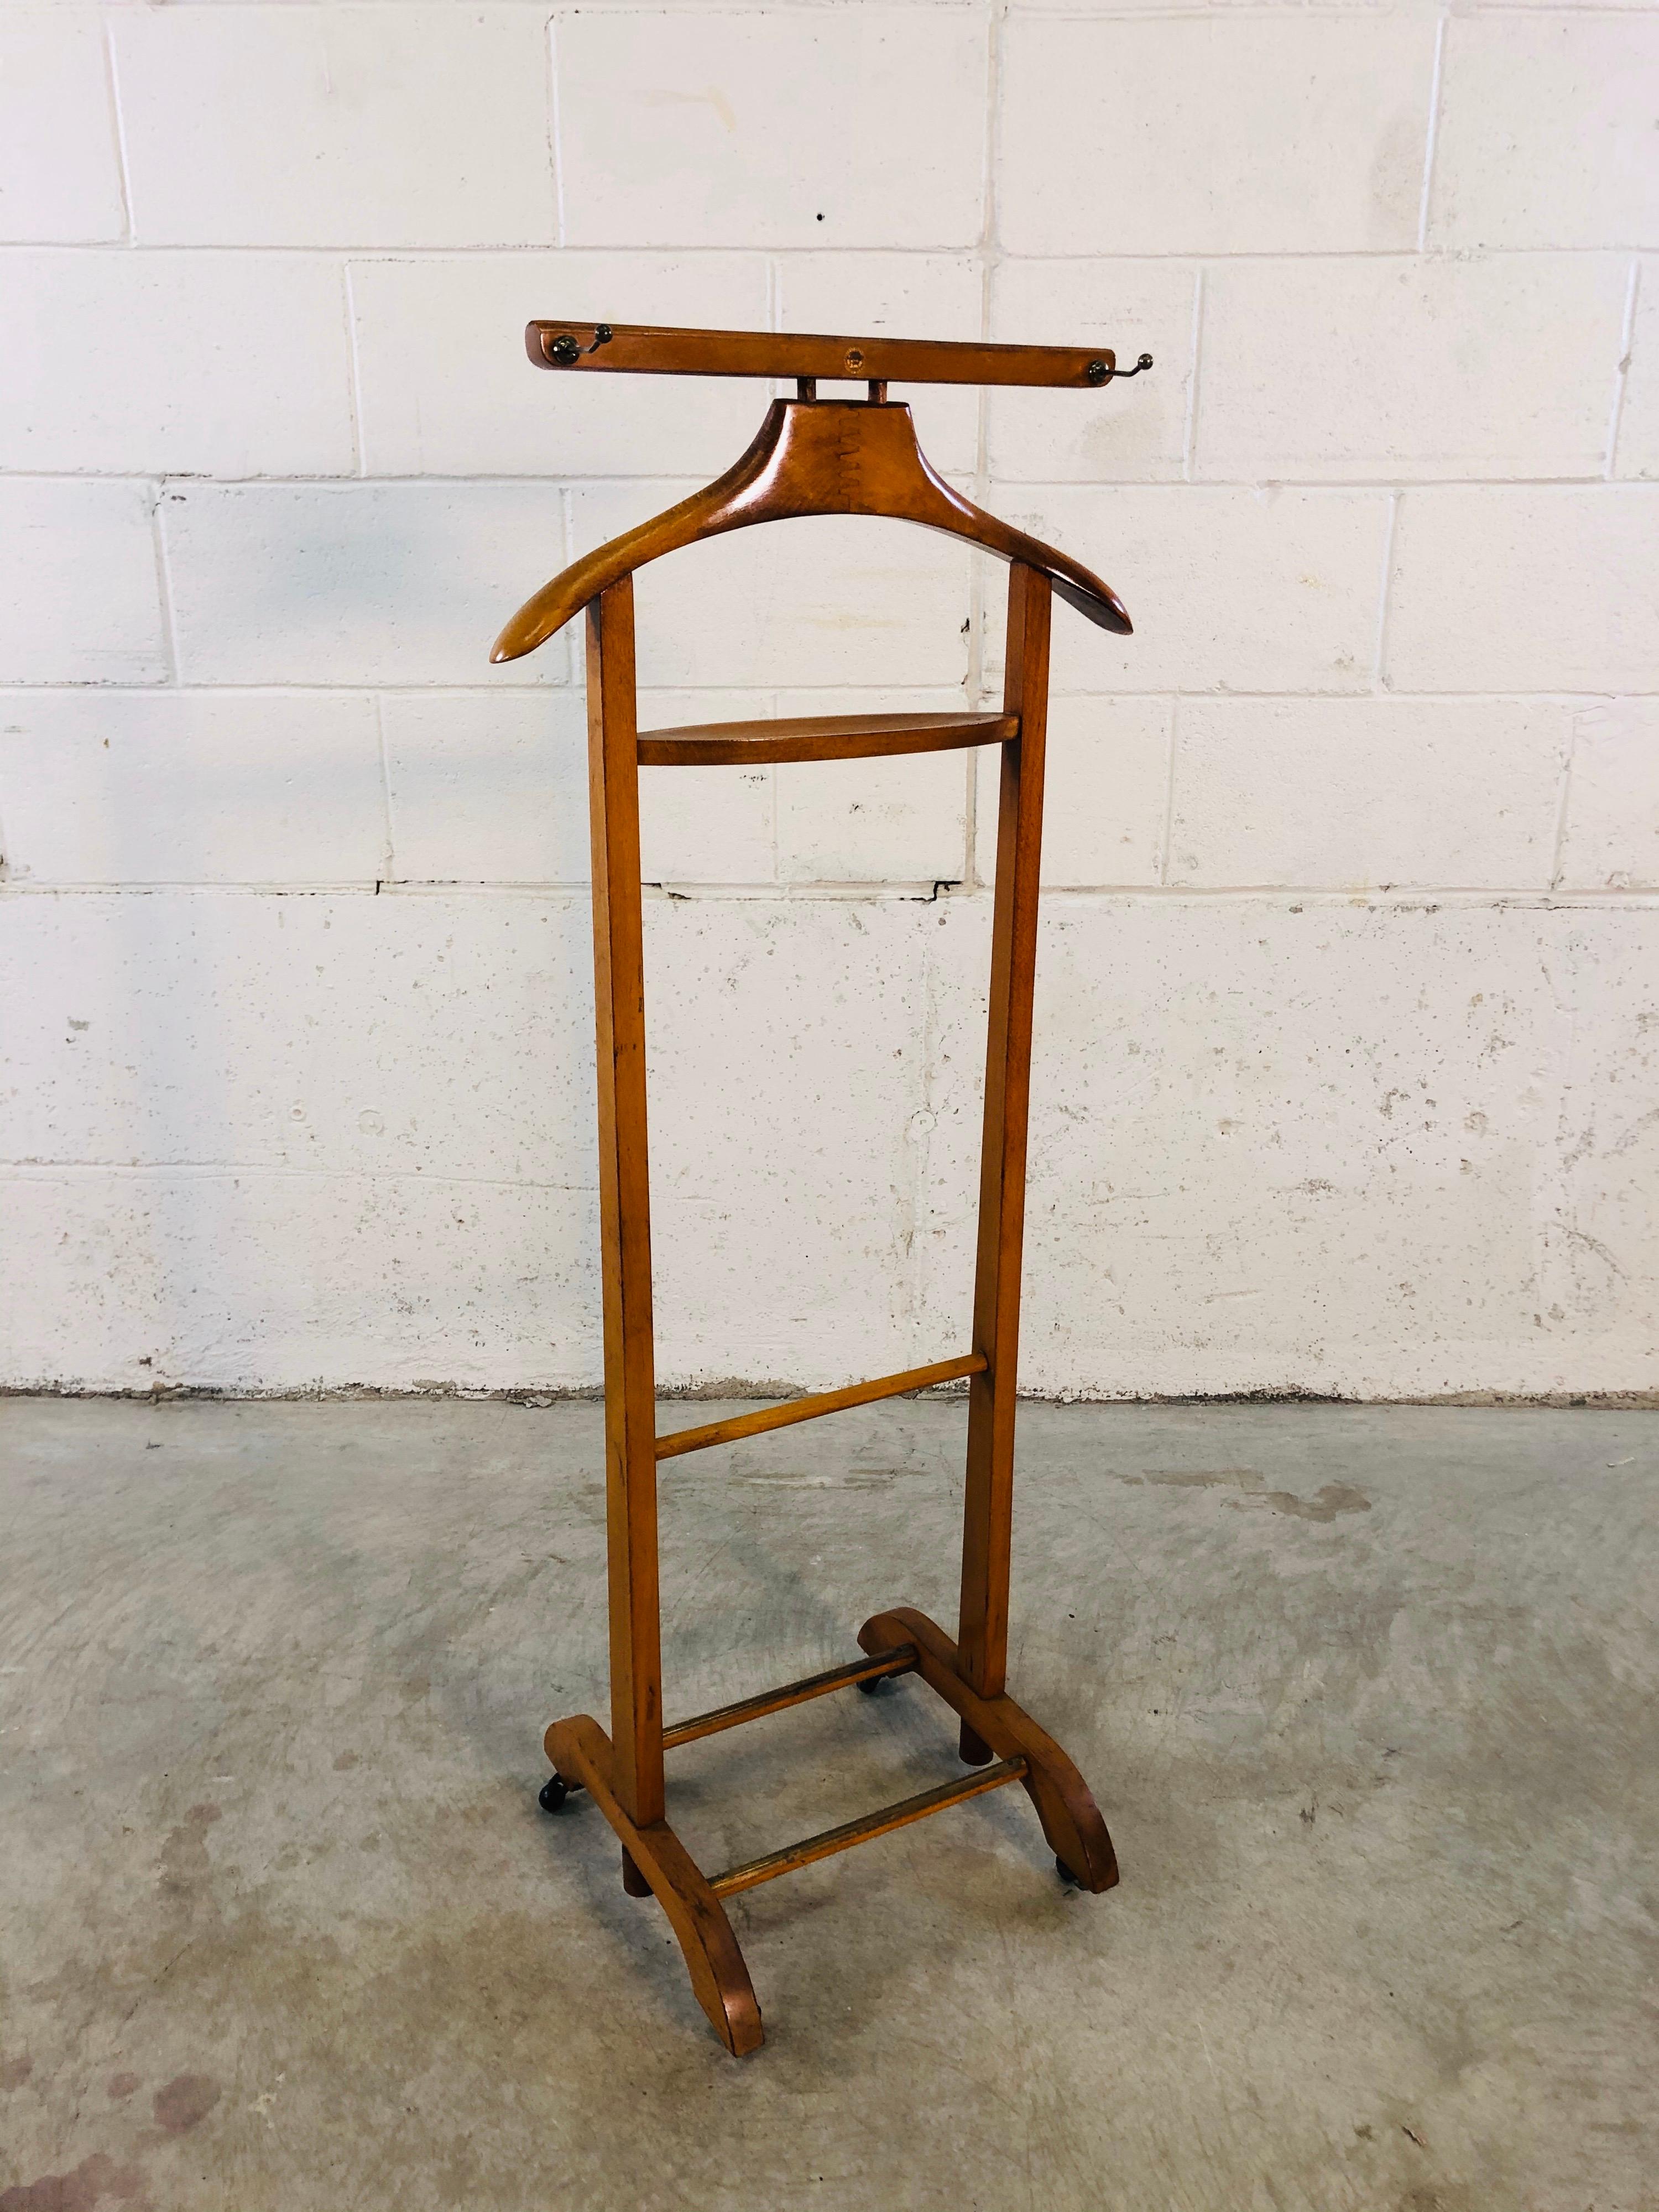 Vintage 1960s men’s bedroom valet stand in bird's-eye maple wood designed by Fratelli Reguitti in Italy. The Stand comes with a tray for change or cufflinks and two hooks for ties. Marked.